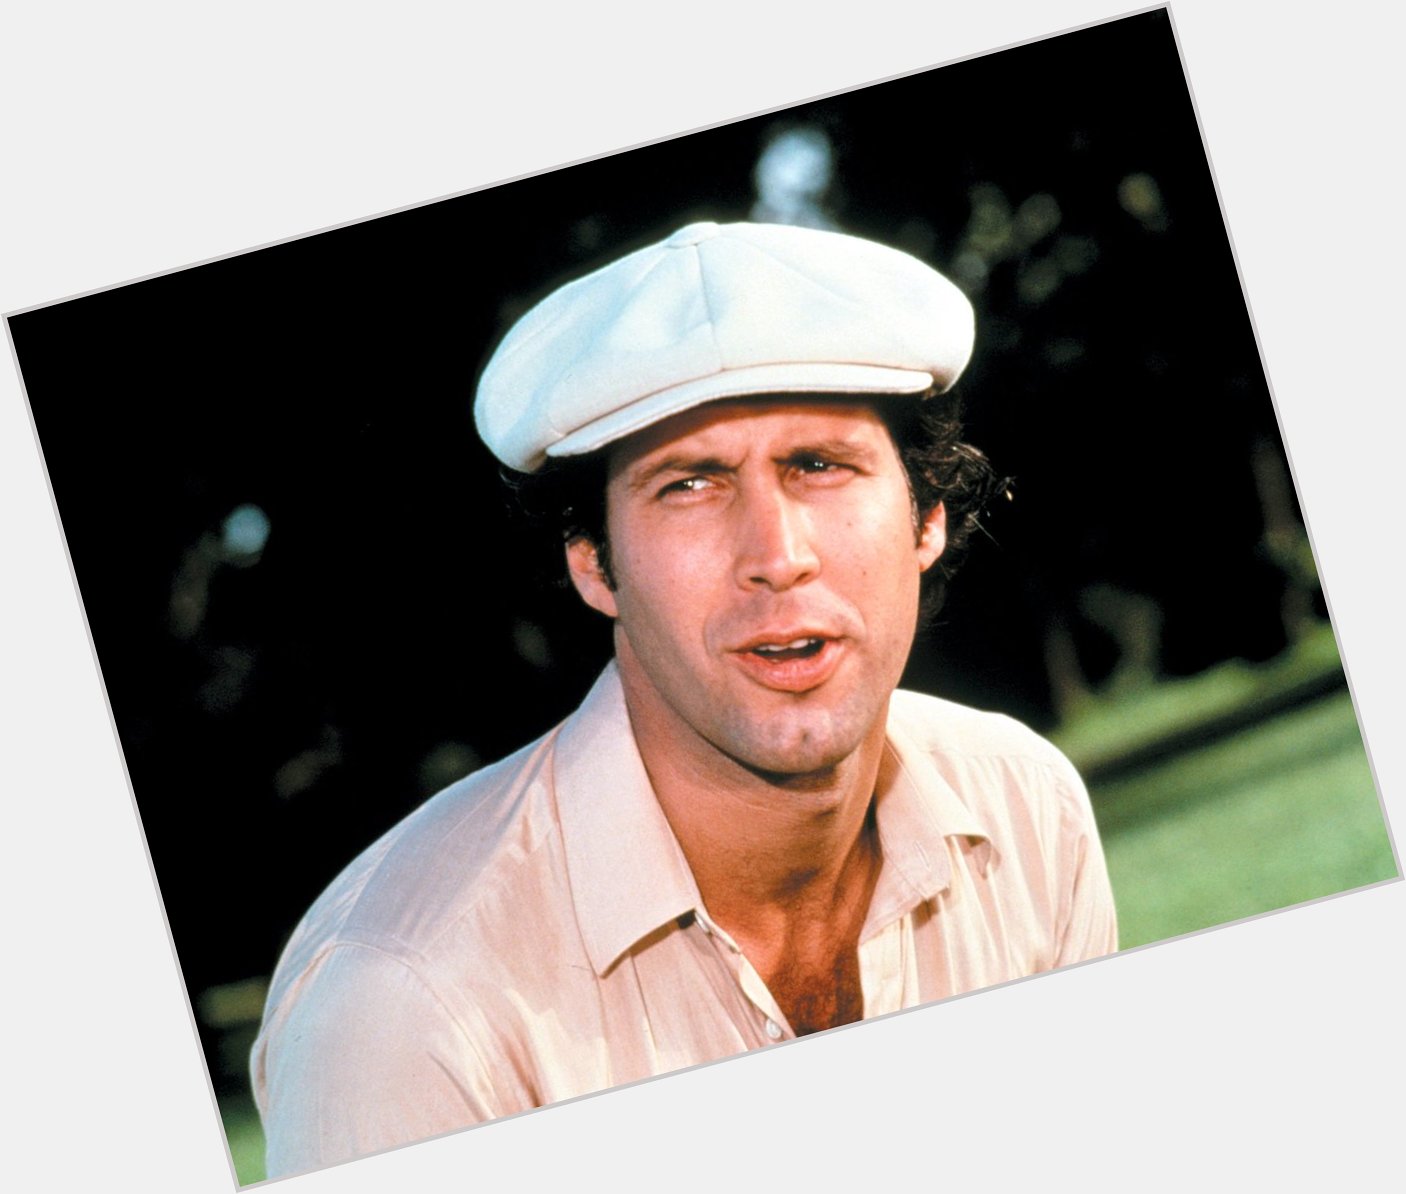 Happy Birthday to Chevy Chase who turns 76 today! 